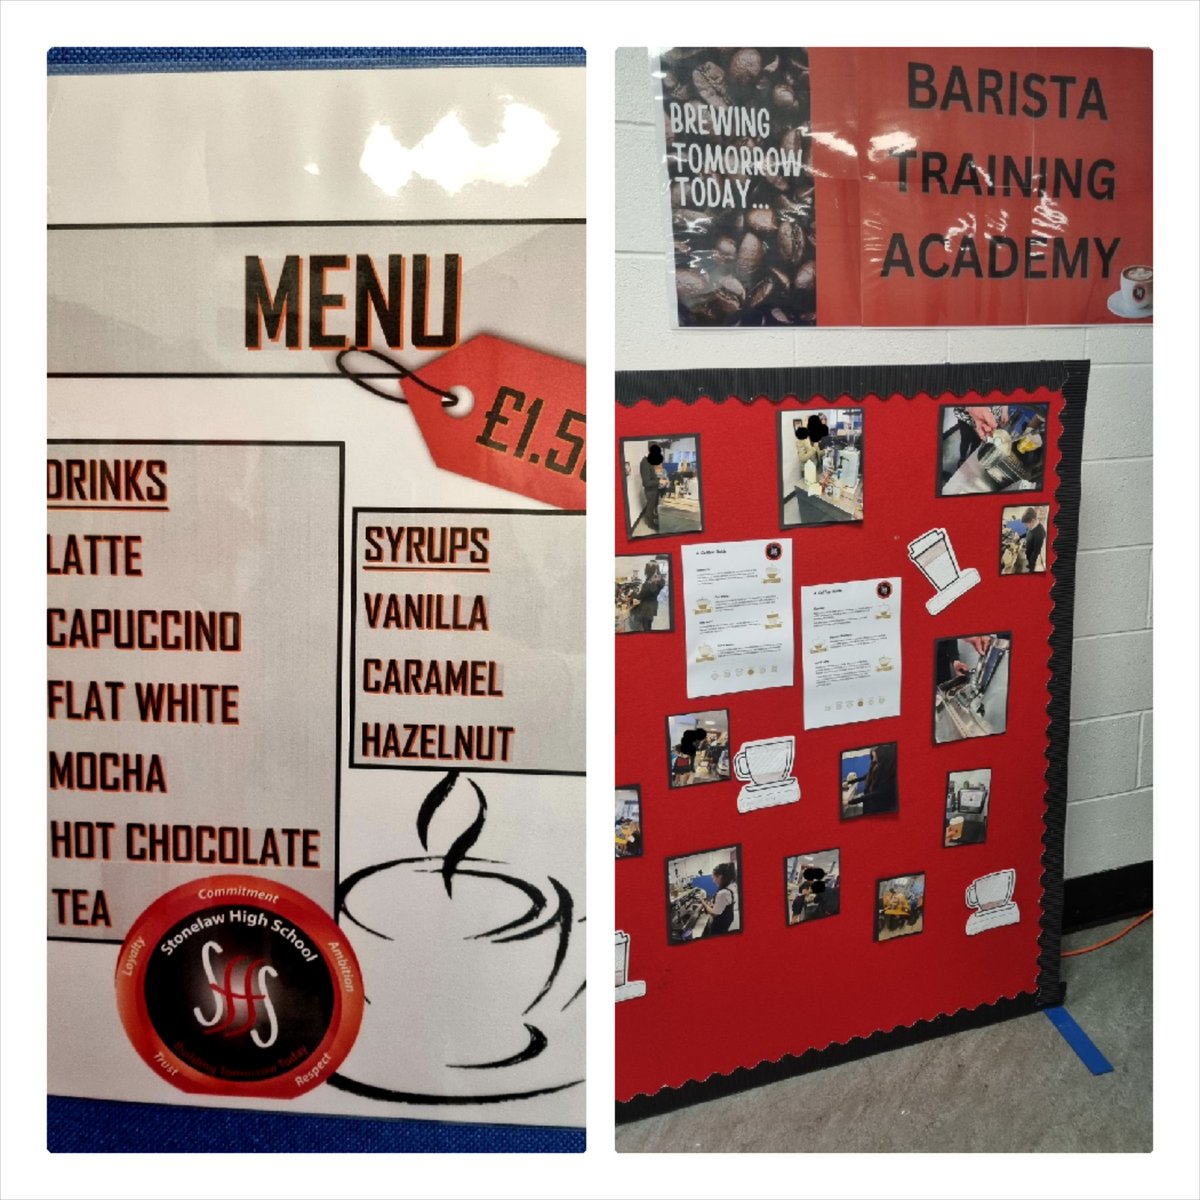 Helping out with Barista and Breakfast Club ☺ #newposter #newdisplay #Barista #Breakfastclub @BusinessEd_SHS